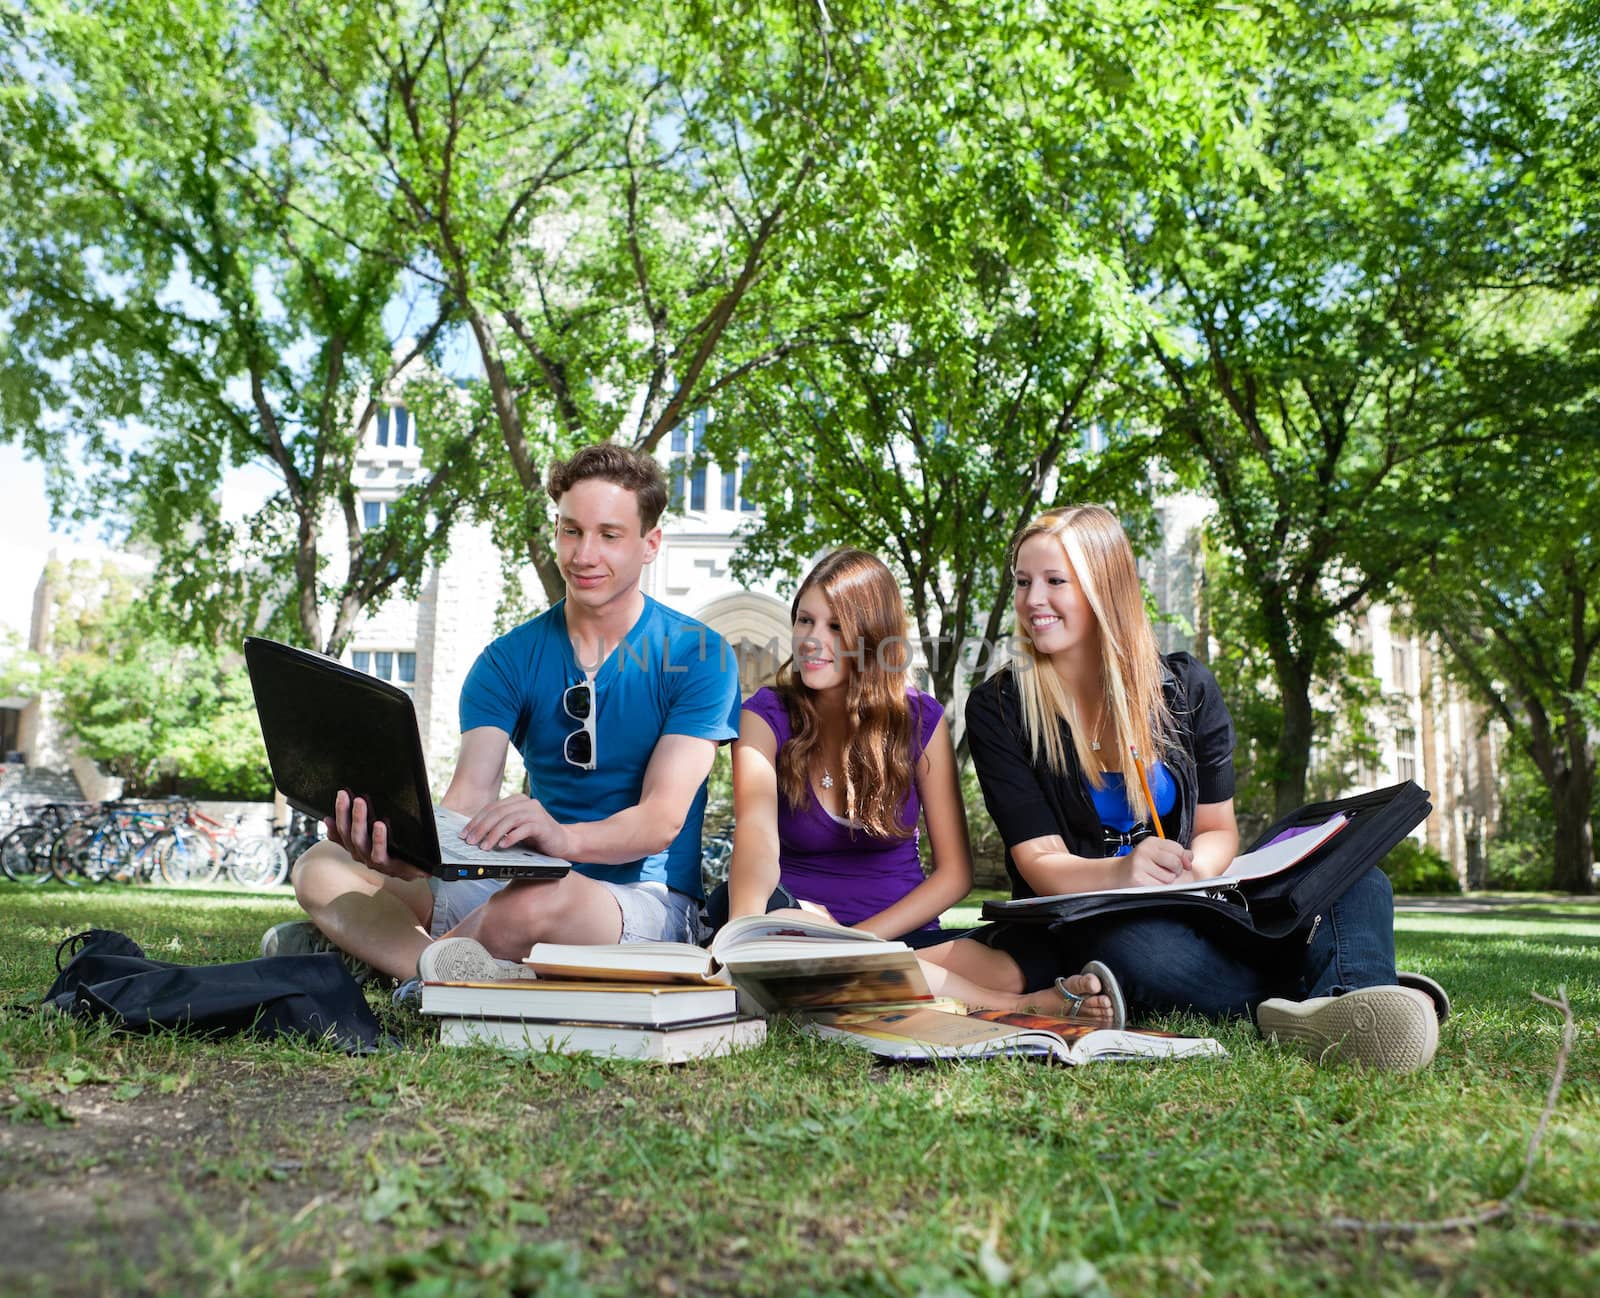 Teenagers studying on campus lawn by leaf